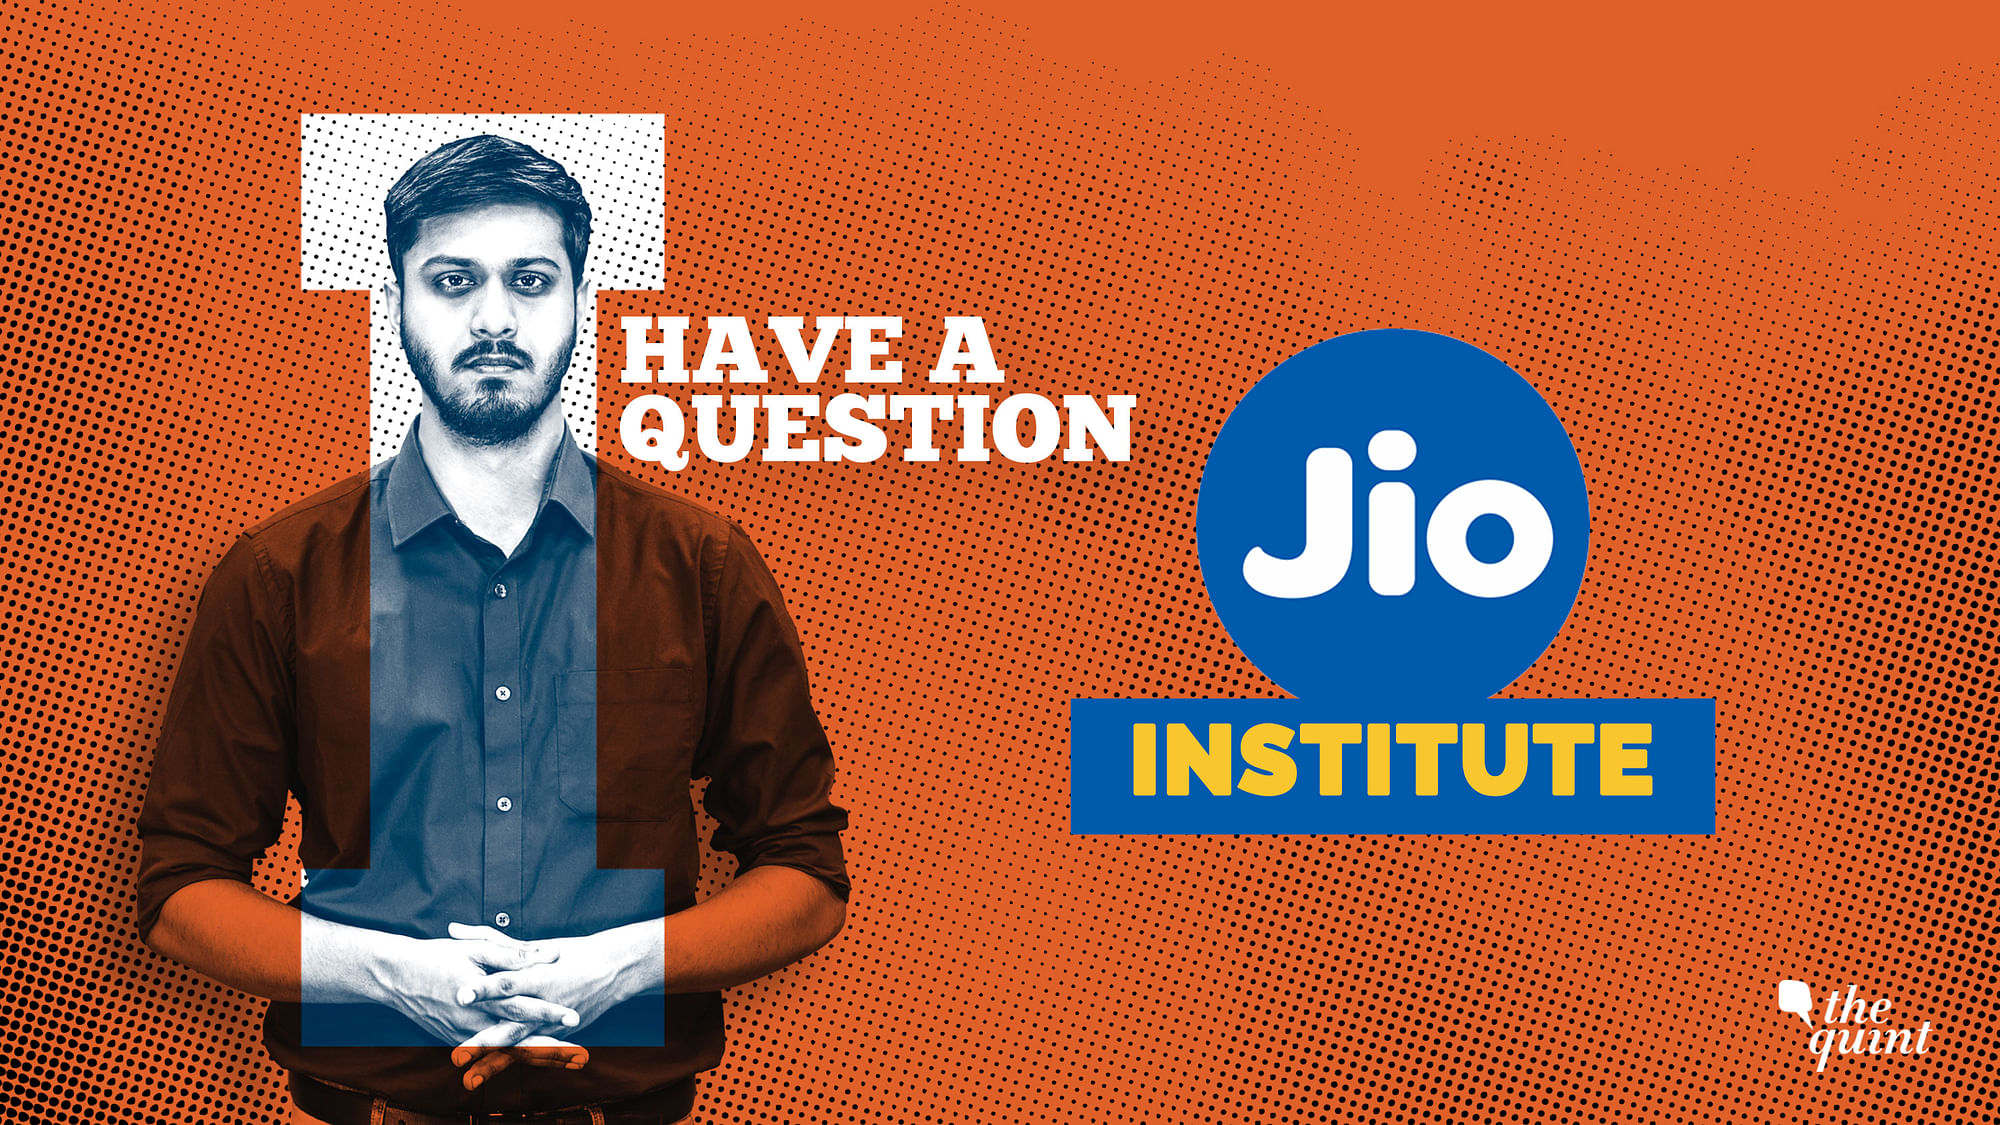 It’s not just Jio Institute, the entire selection process of ‘Institutes of Eminence’ was clearly flawed.